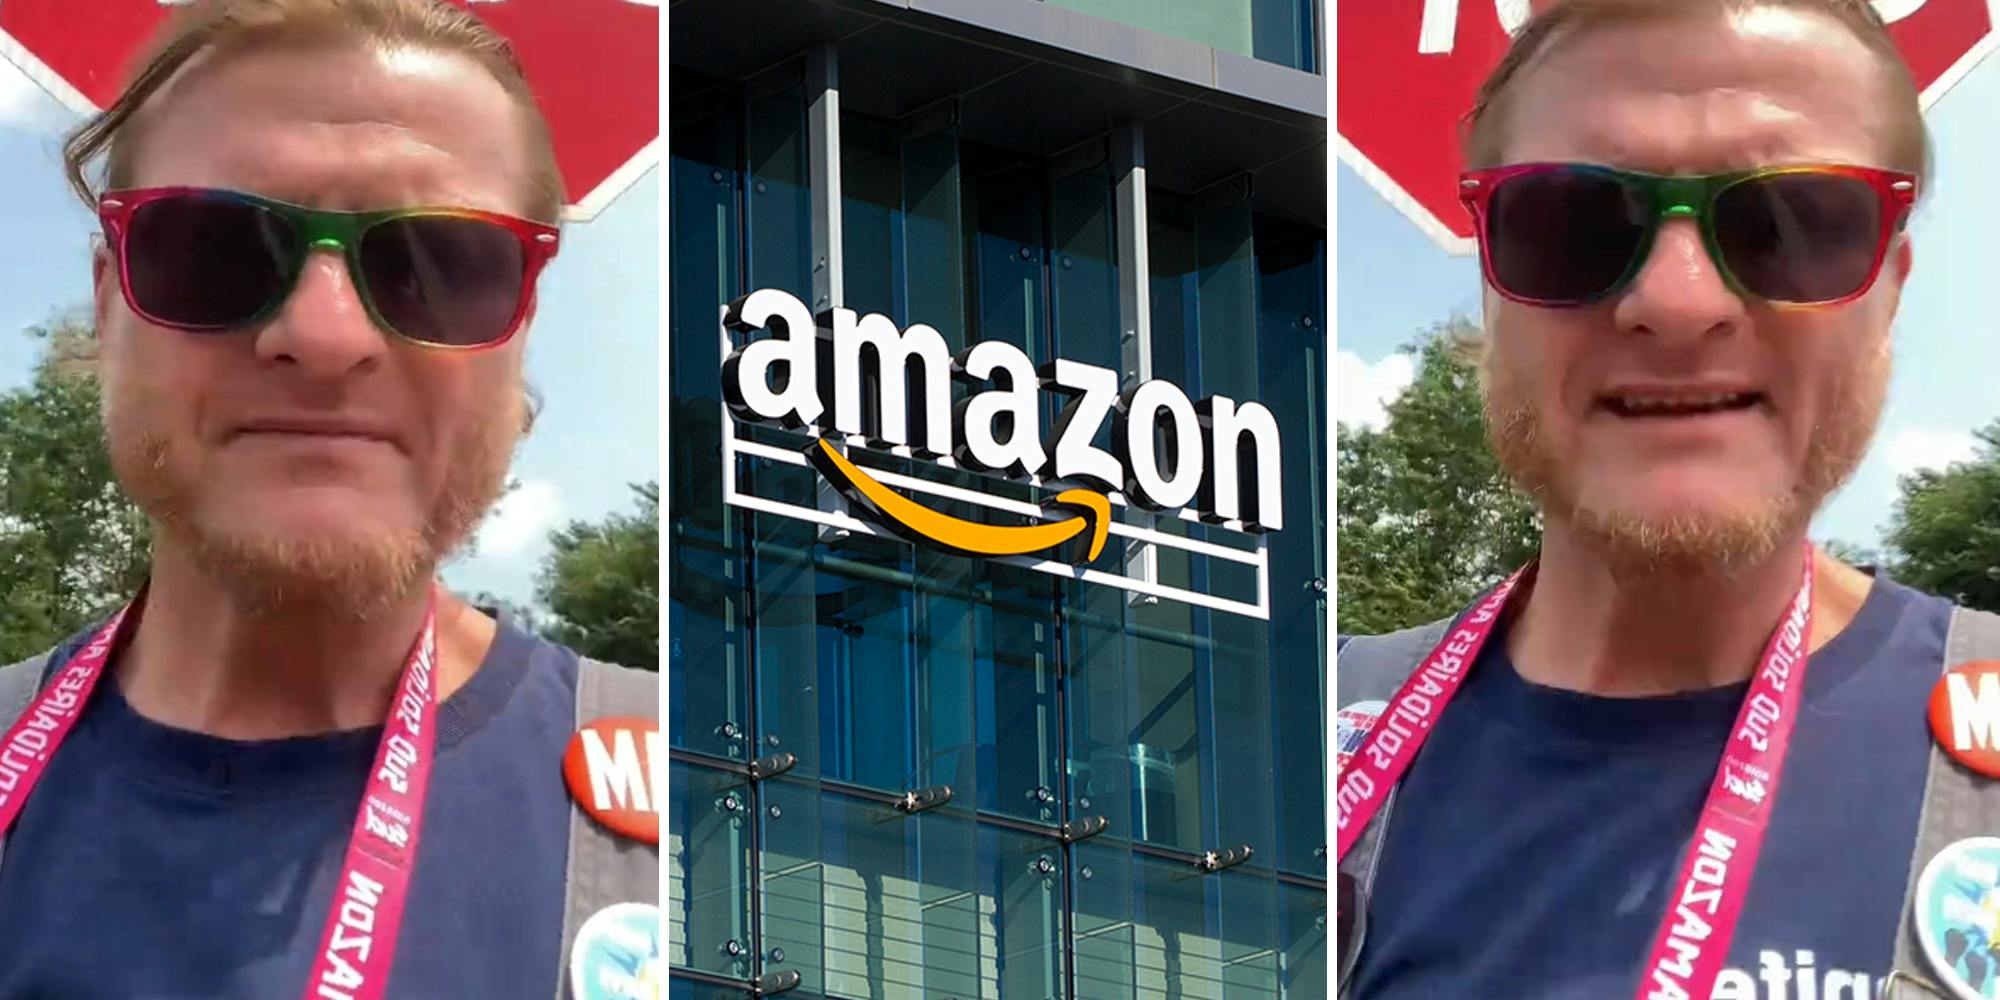 ‘Shopping addiction cured!’: Amazon worker warns of bed bug infestation at Amazon warehouse